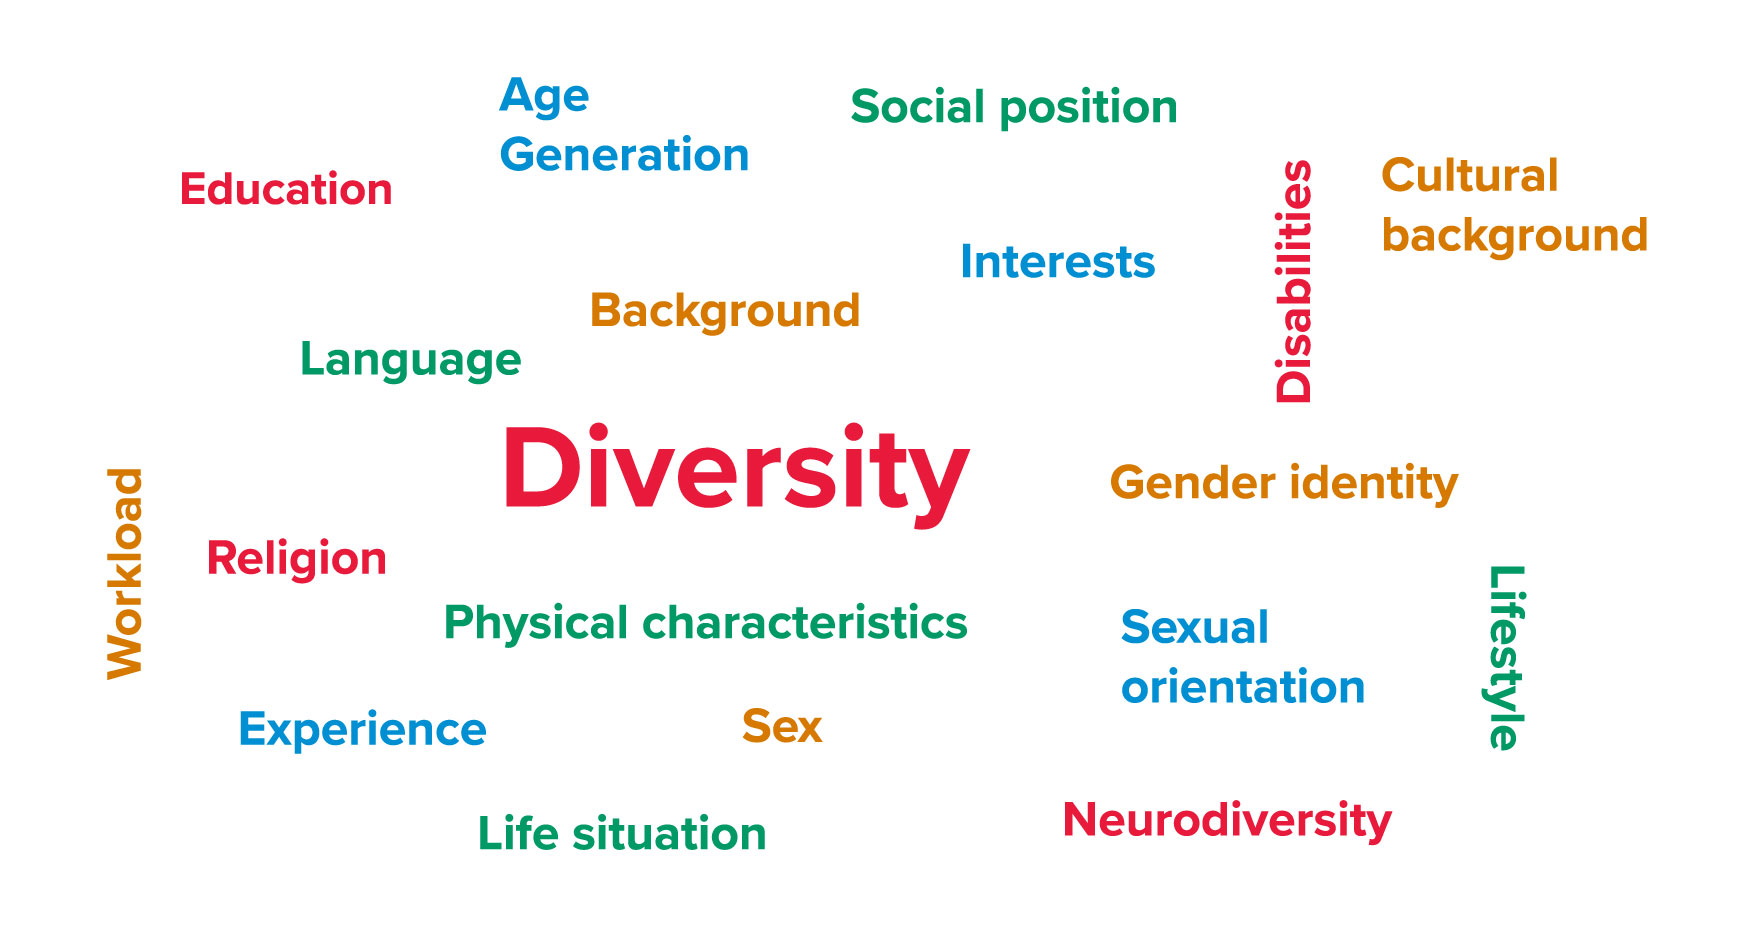 "Tag Cloud: Diversity, Religion, Neurodiversity, Disabilities, Education, Workload, Background, Gender Identity, Culural Background, Sex, Language, Physical characteristics, Life situation, Liefstyle, Social position, Age Generation, Interests, Sexual orientation, Experience"